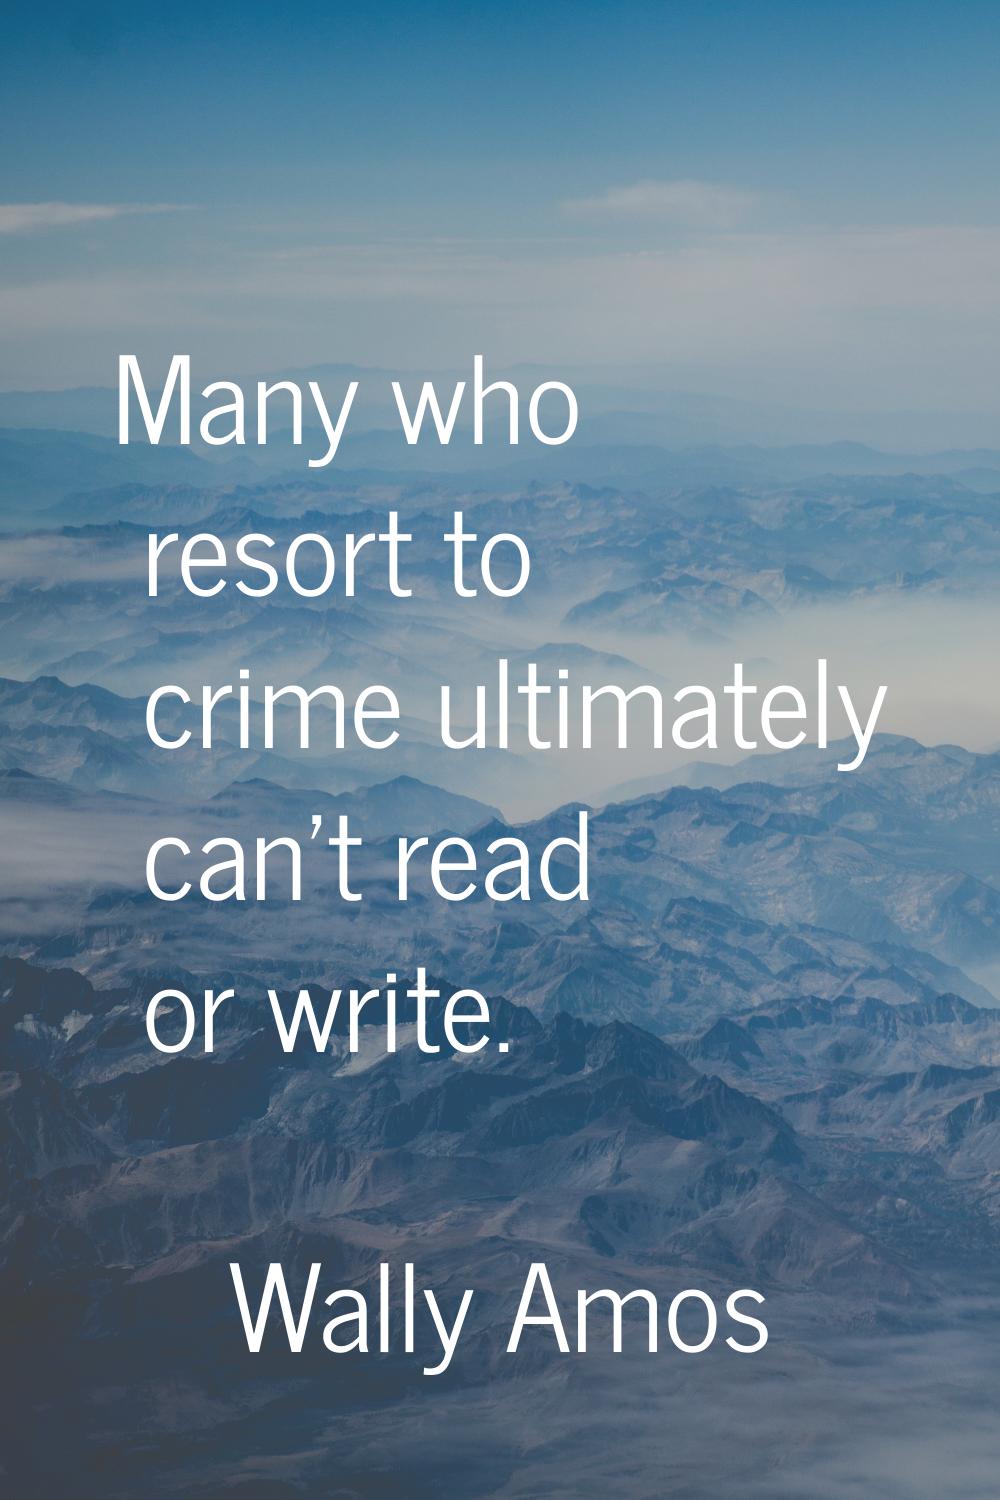 Many who resort to crime ultimately can't read or write.